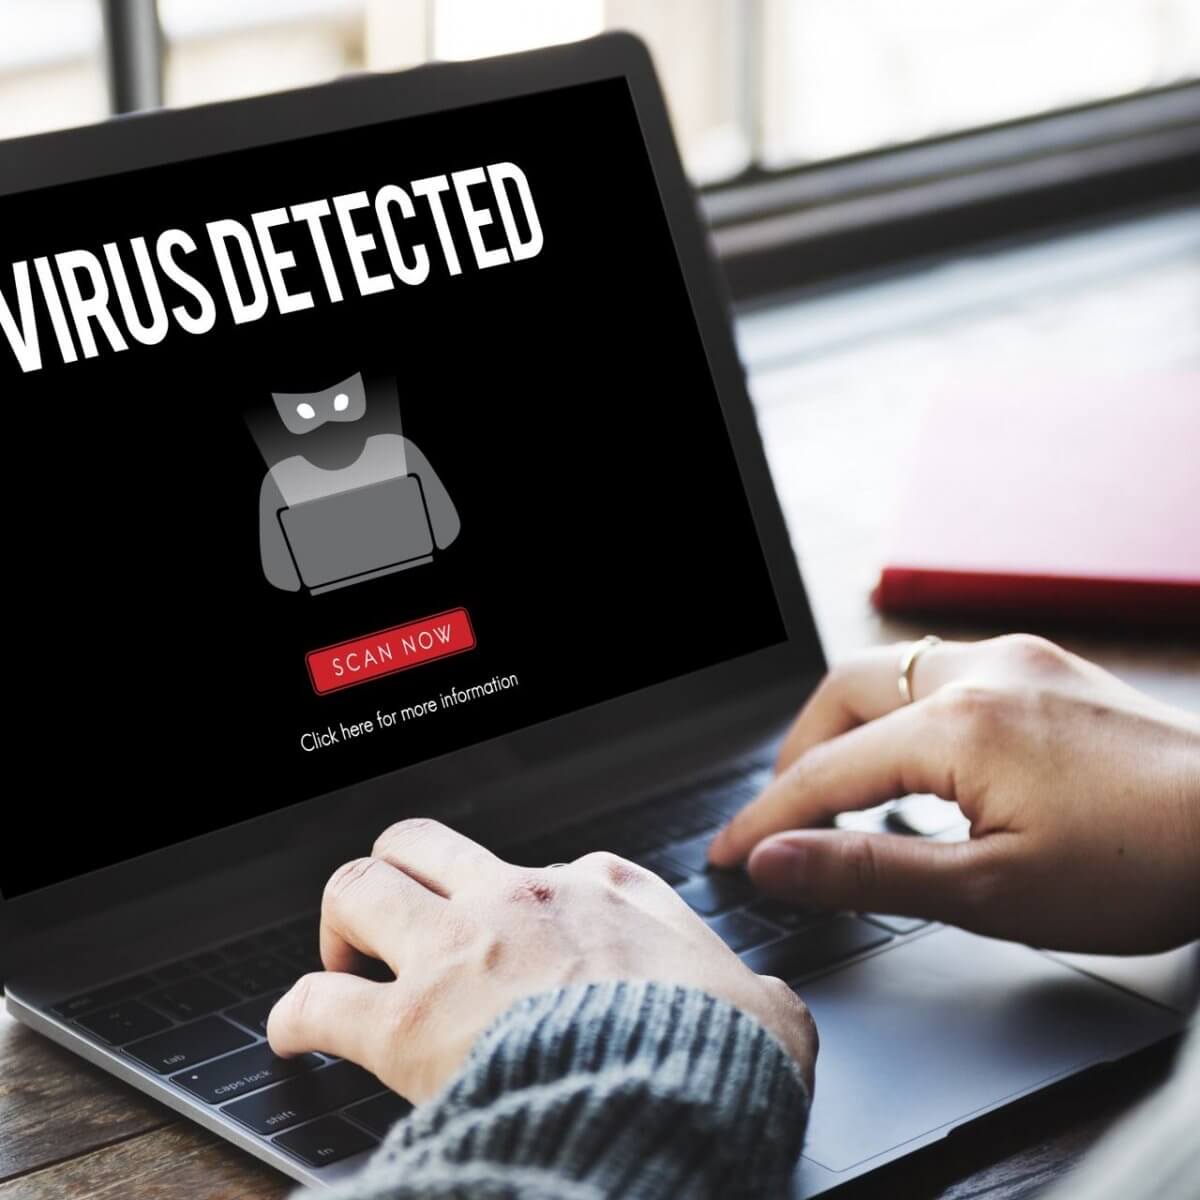 can virtual desktops protect your computer from viruses